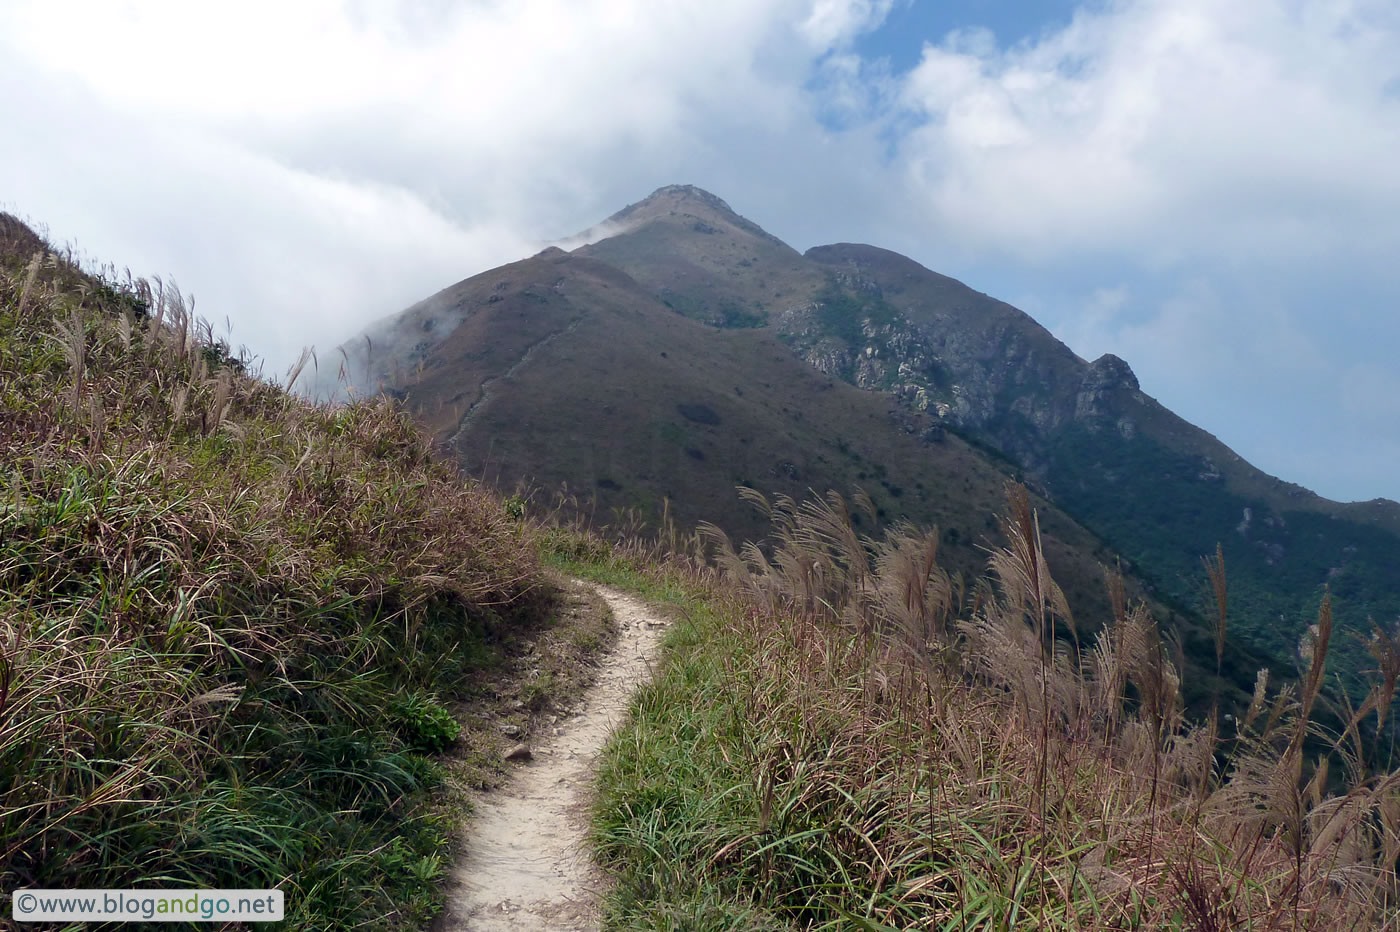 Lantau Trail - Just another bend